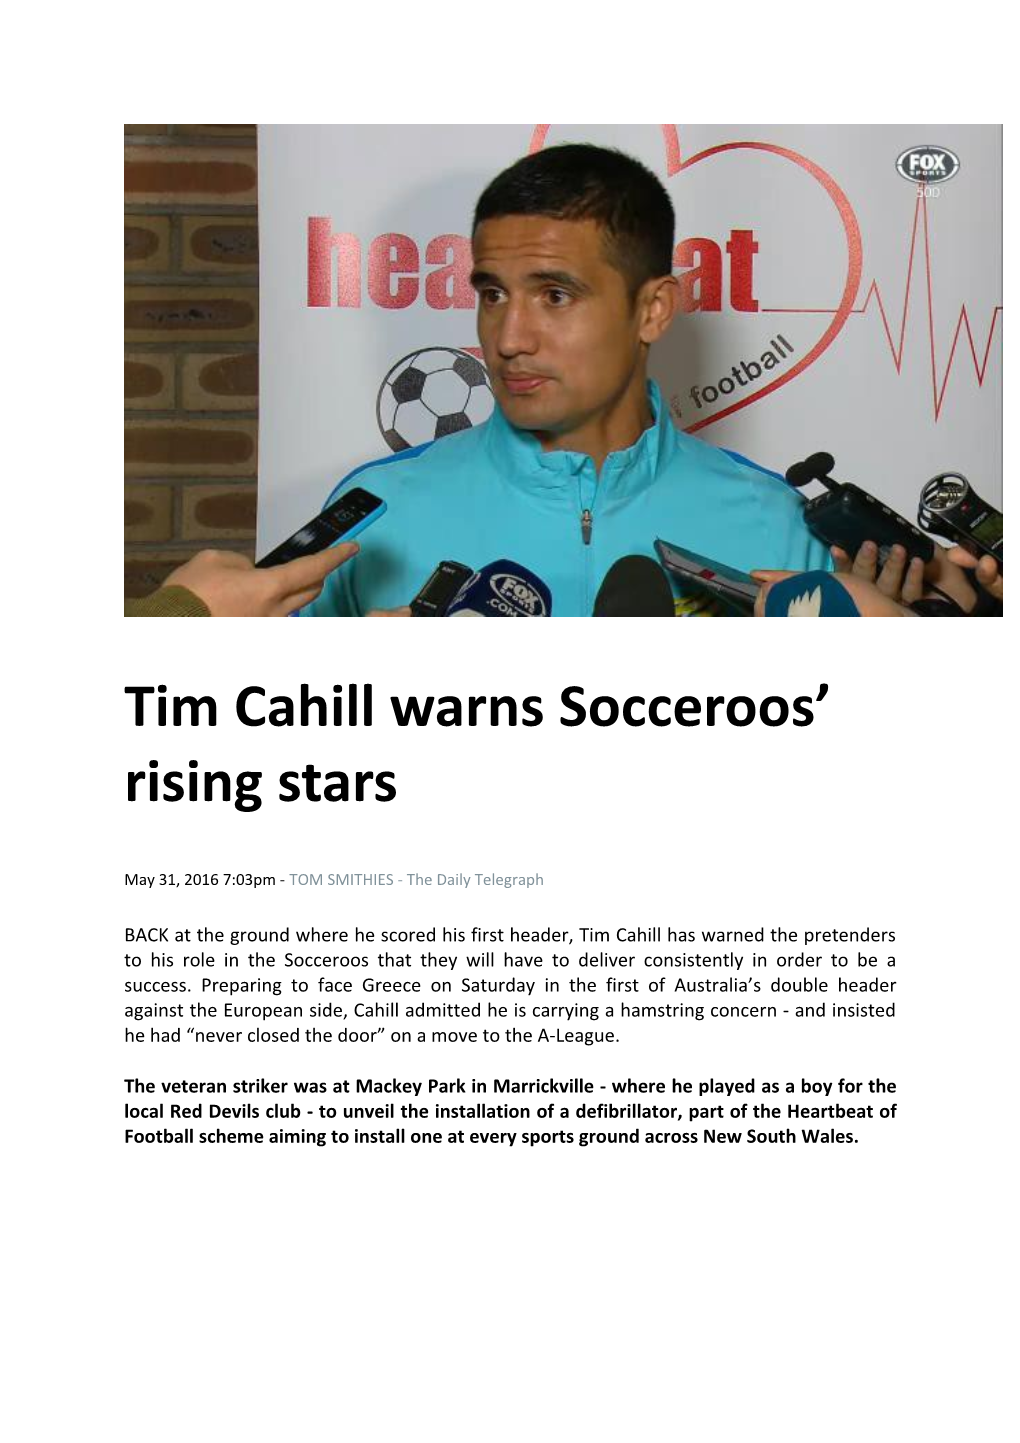 Tim Cahill Warns Socceroos Rising Stars May 31, 2016 7:03Pm - TOM SMITHIES - the Daily